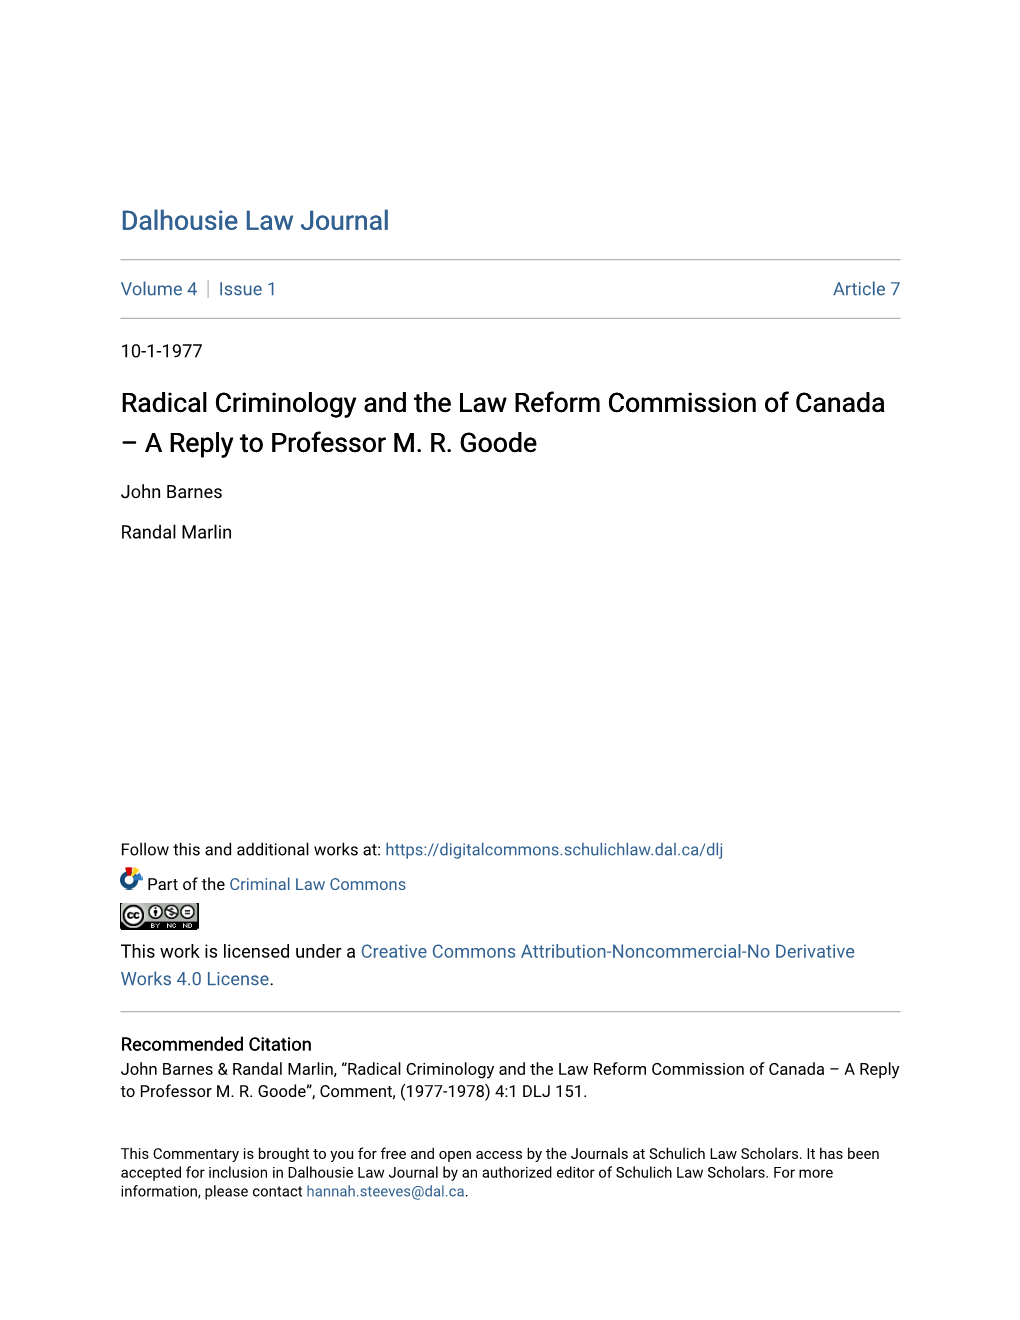 Radical Criminology and the Law Reform Commission of Canada – a Reply to Professor M